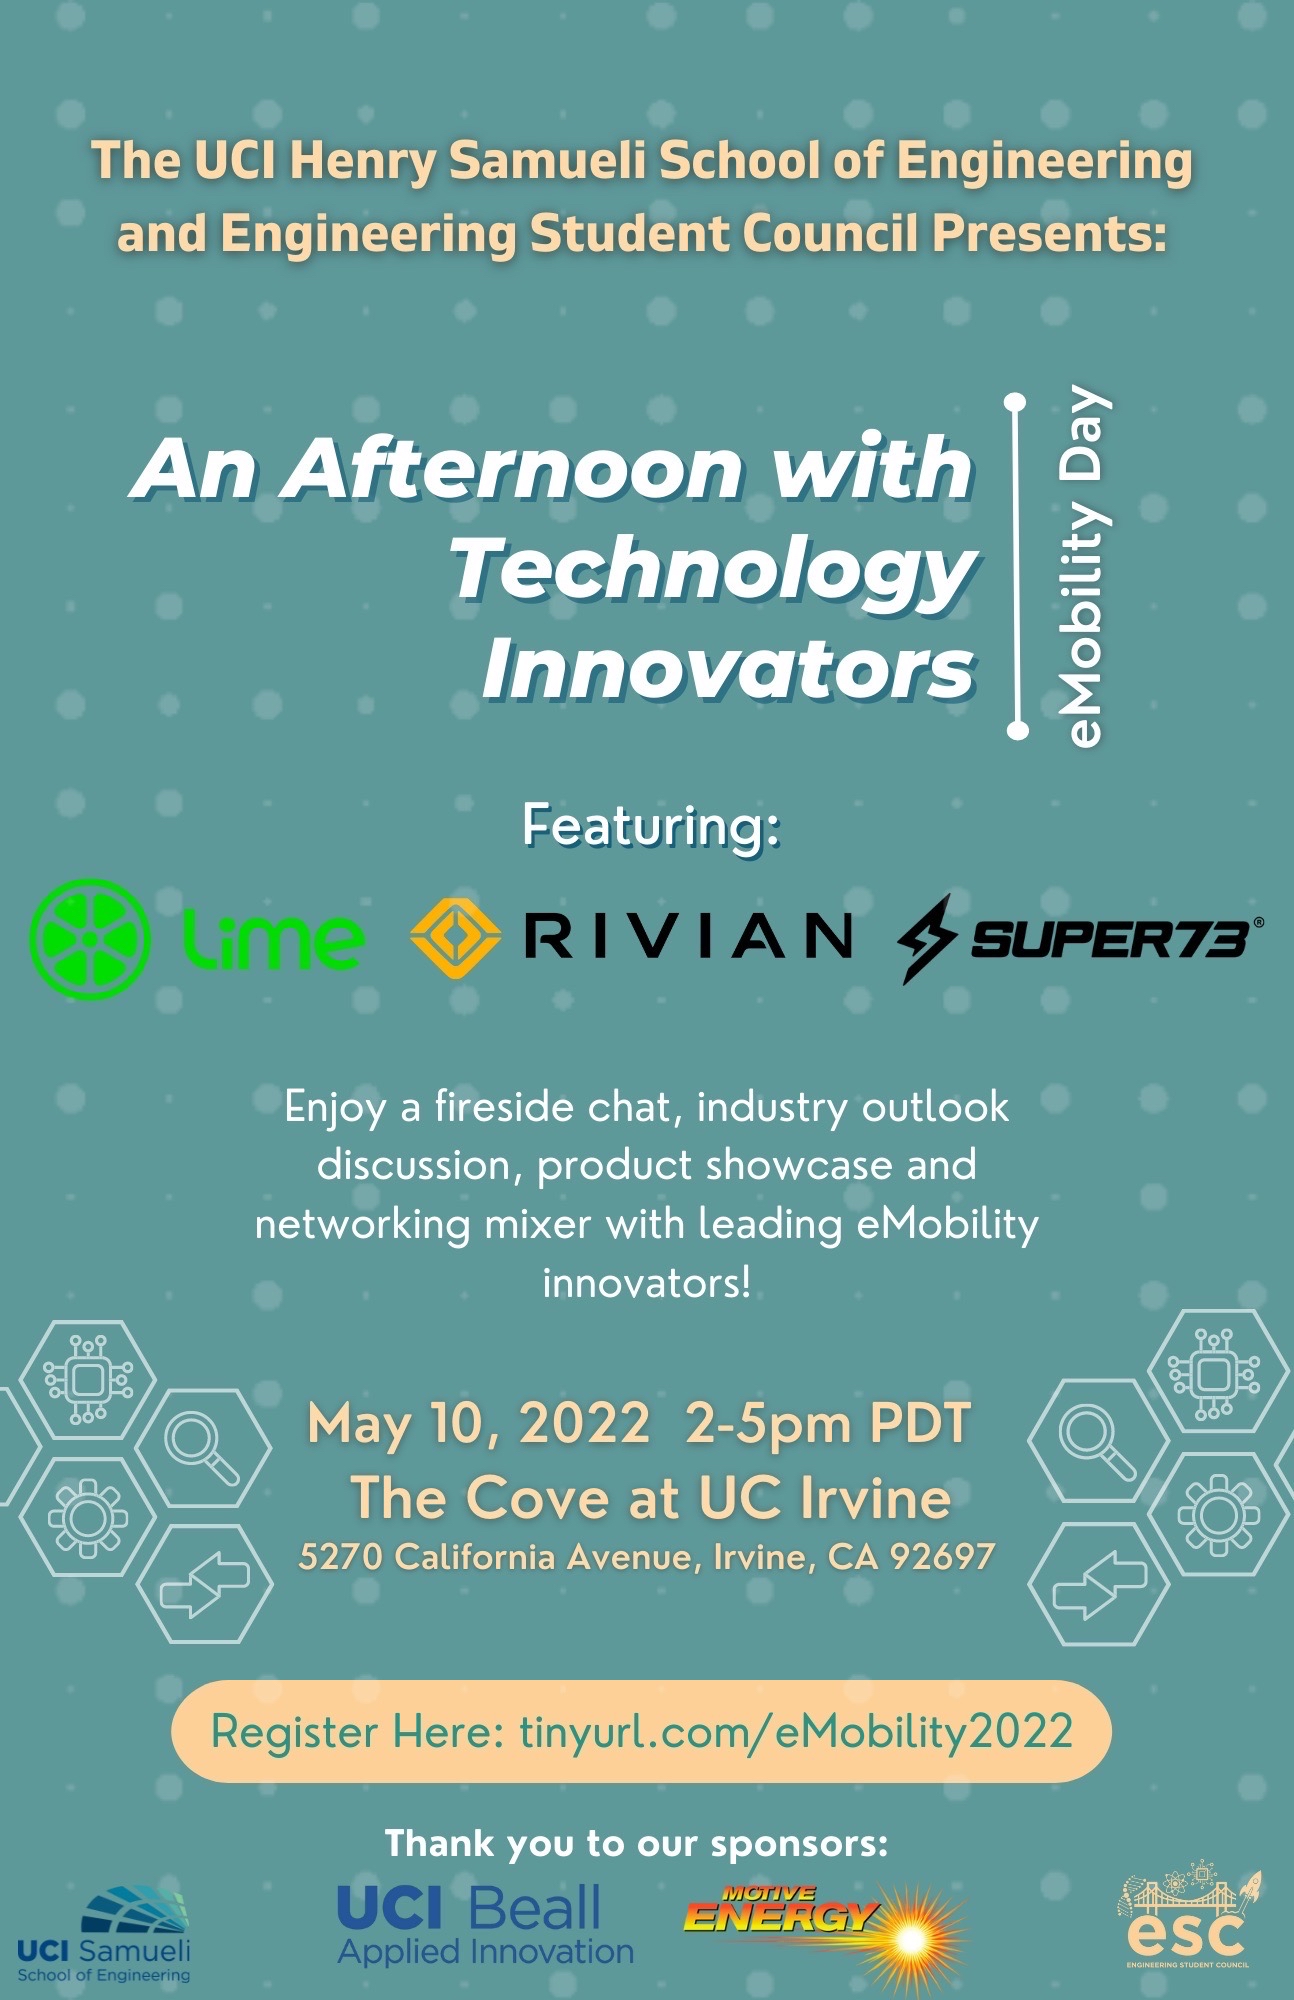 An Afternoon with Technology Innovators featuring Rivian, Super73 and Lime